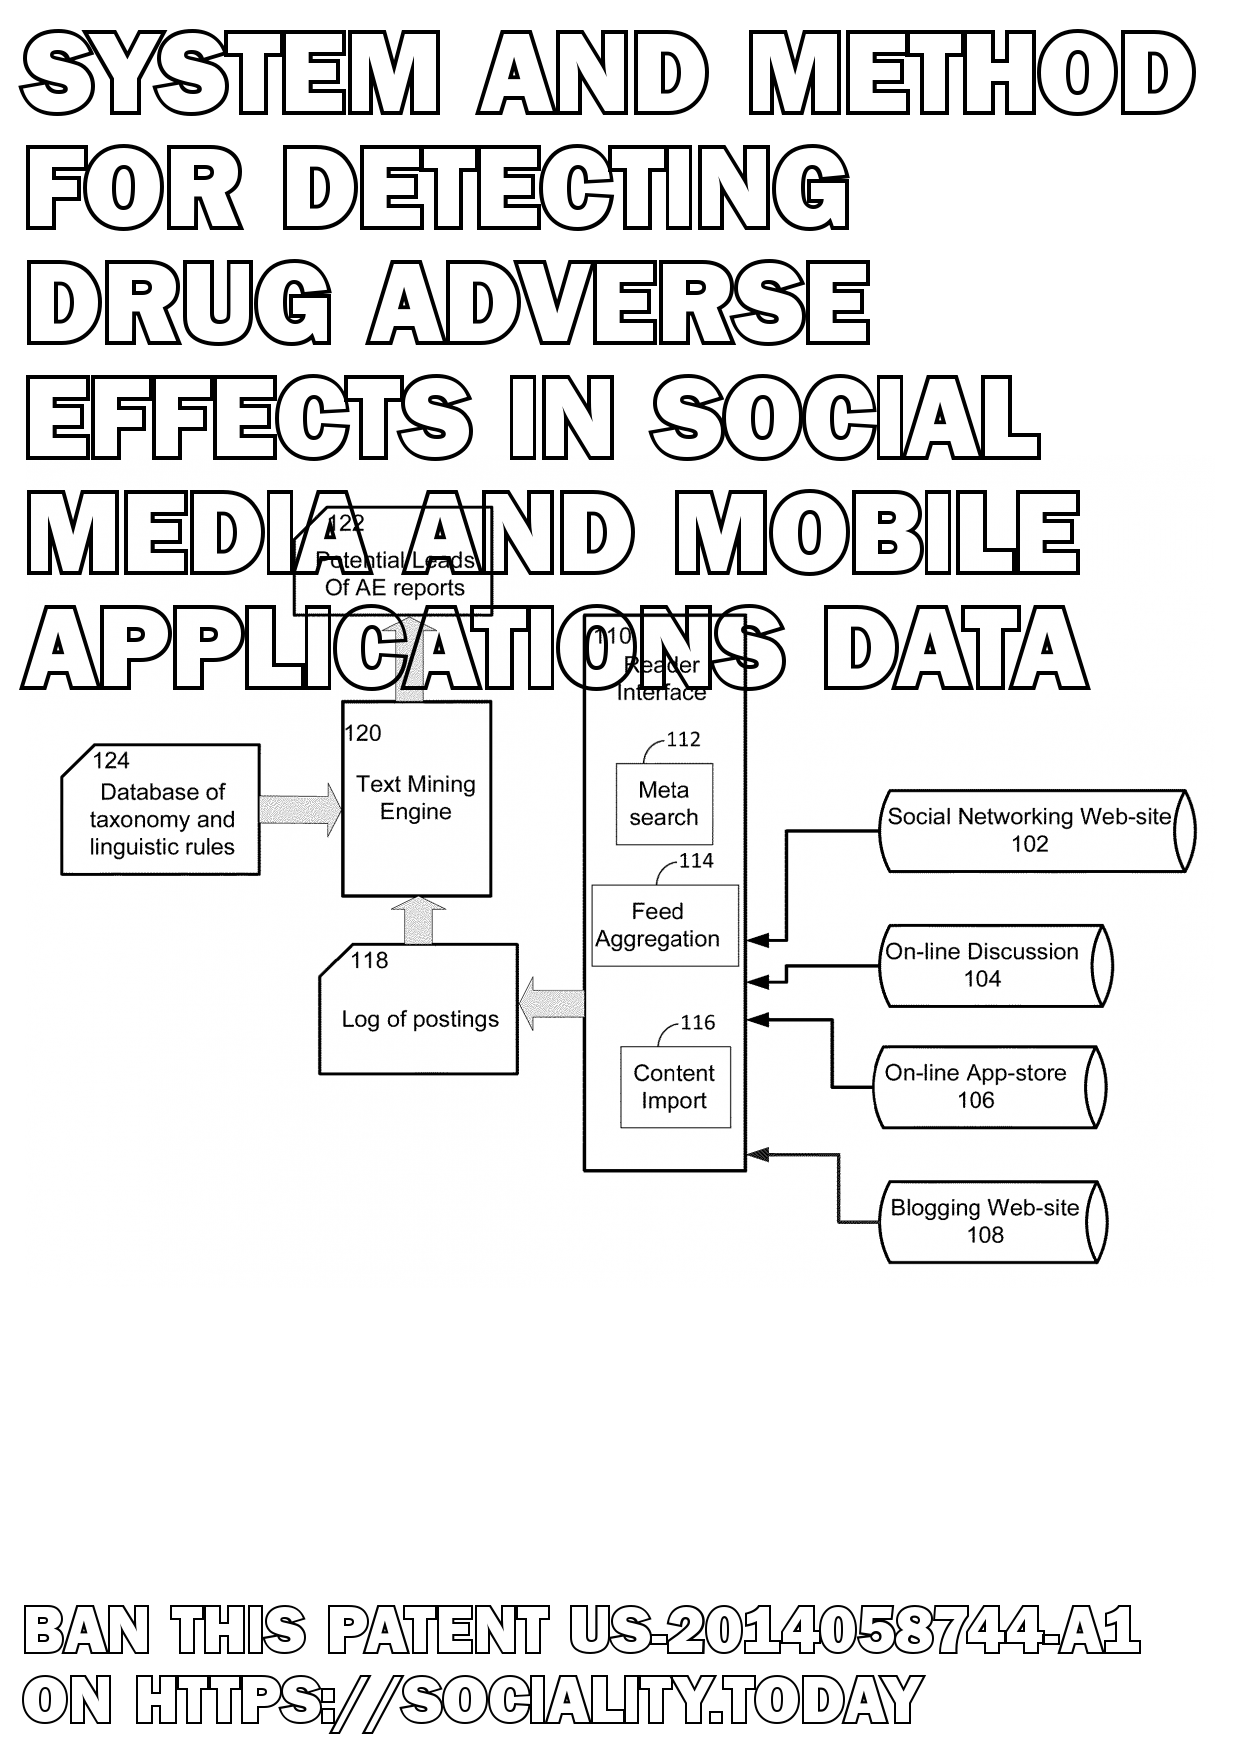 System and Method for Detecting Drug Adverse Effects in Social Media and Mobile Applications Data  - US-2014058744-A1